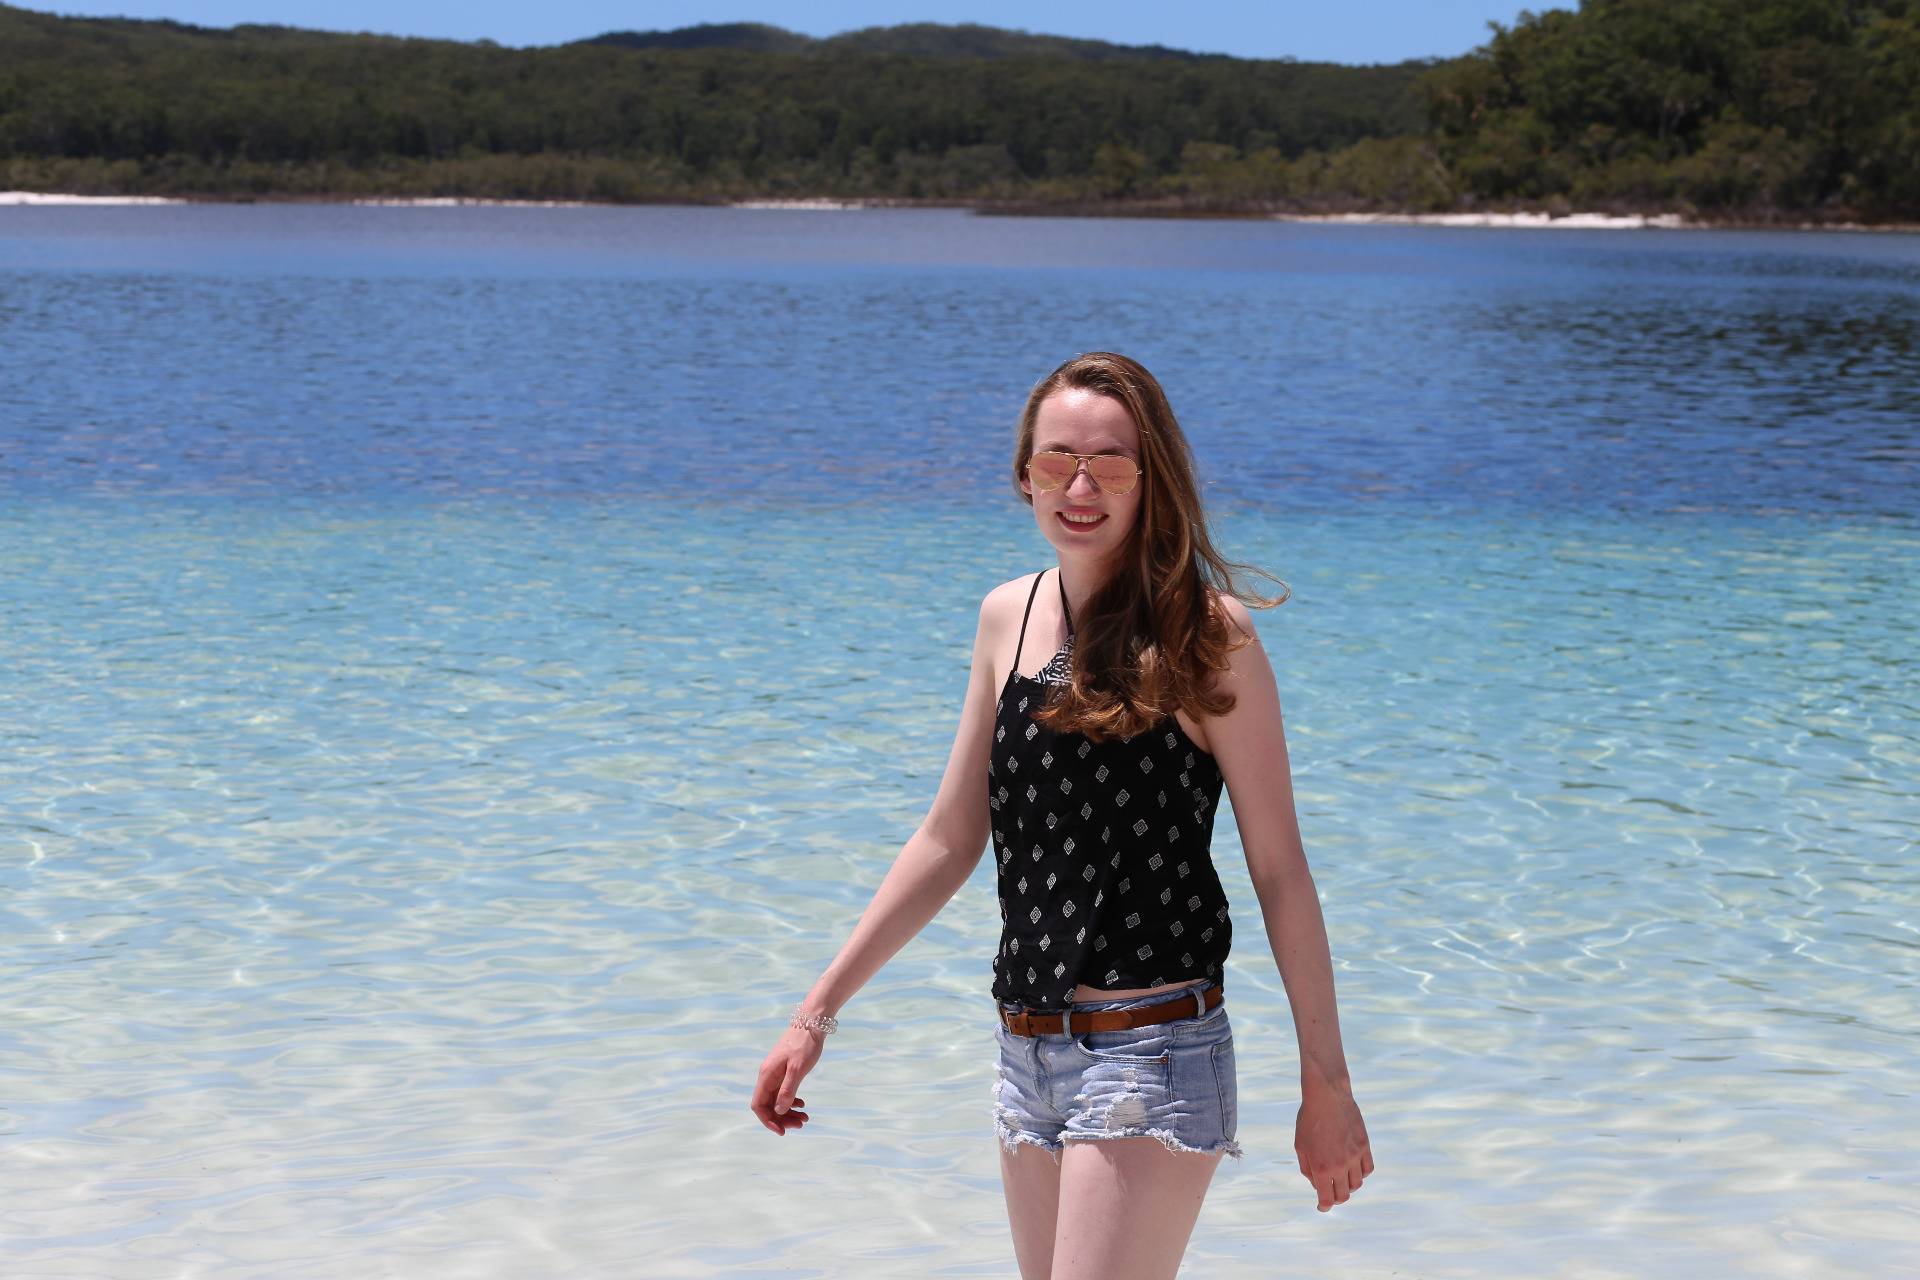 Greatest sight on our Fraser Island Tour: Lake McKenzie